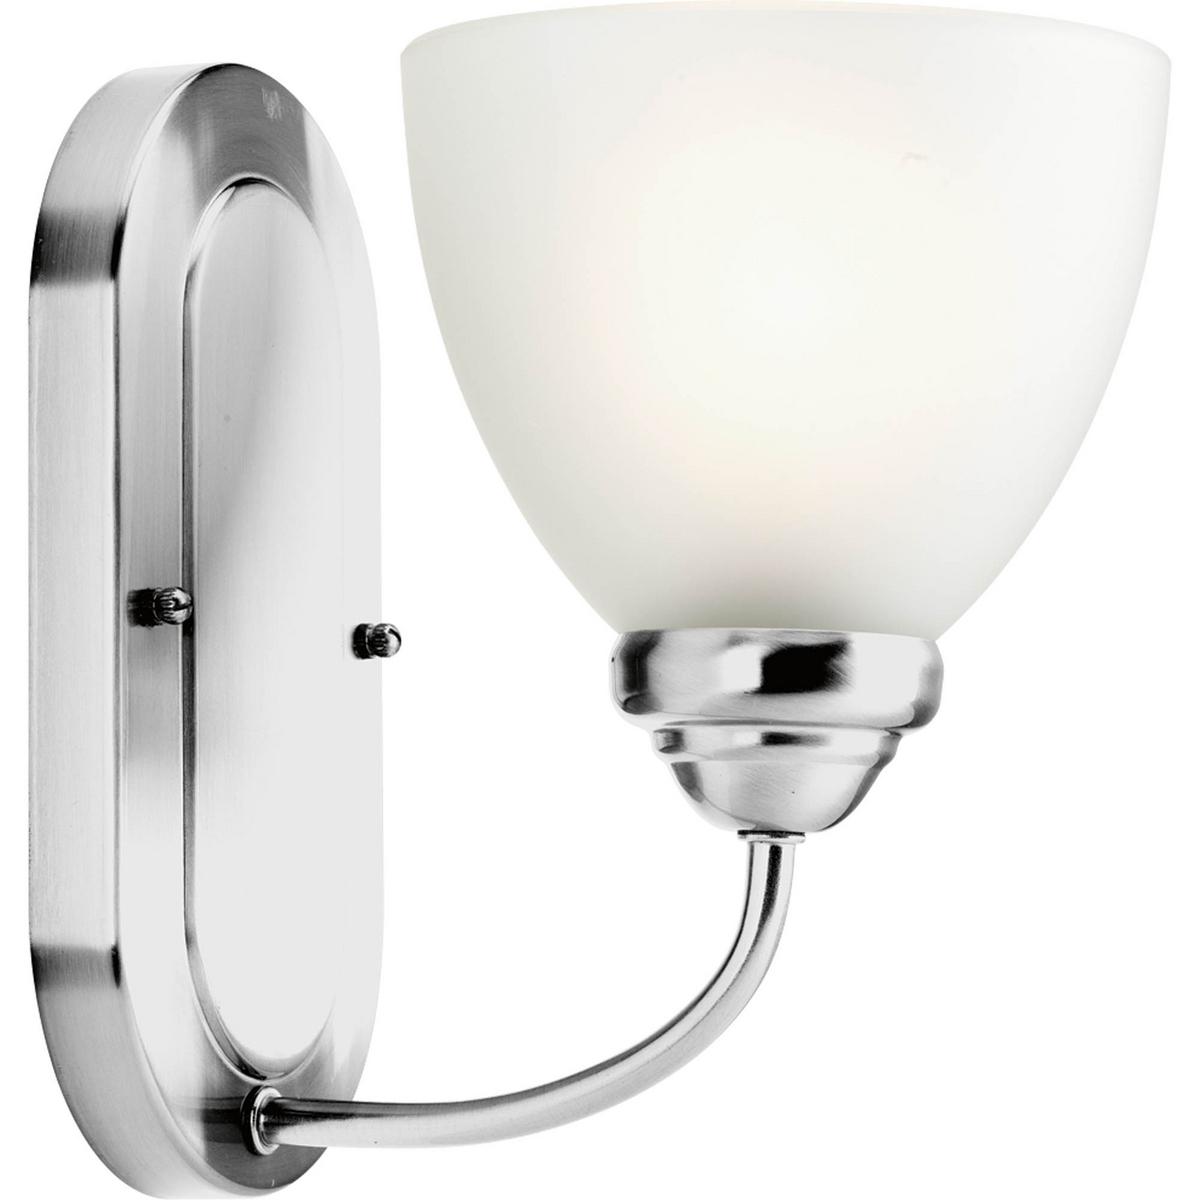 Hubbell P2913-15 The Heart Collection possesses a smart simplicity to complement today's home. This one-light bath bracket includes etched glass shades to add distinction and provide pleasing illumination to any room. Versatile design permits installation of fixture facin